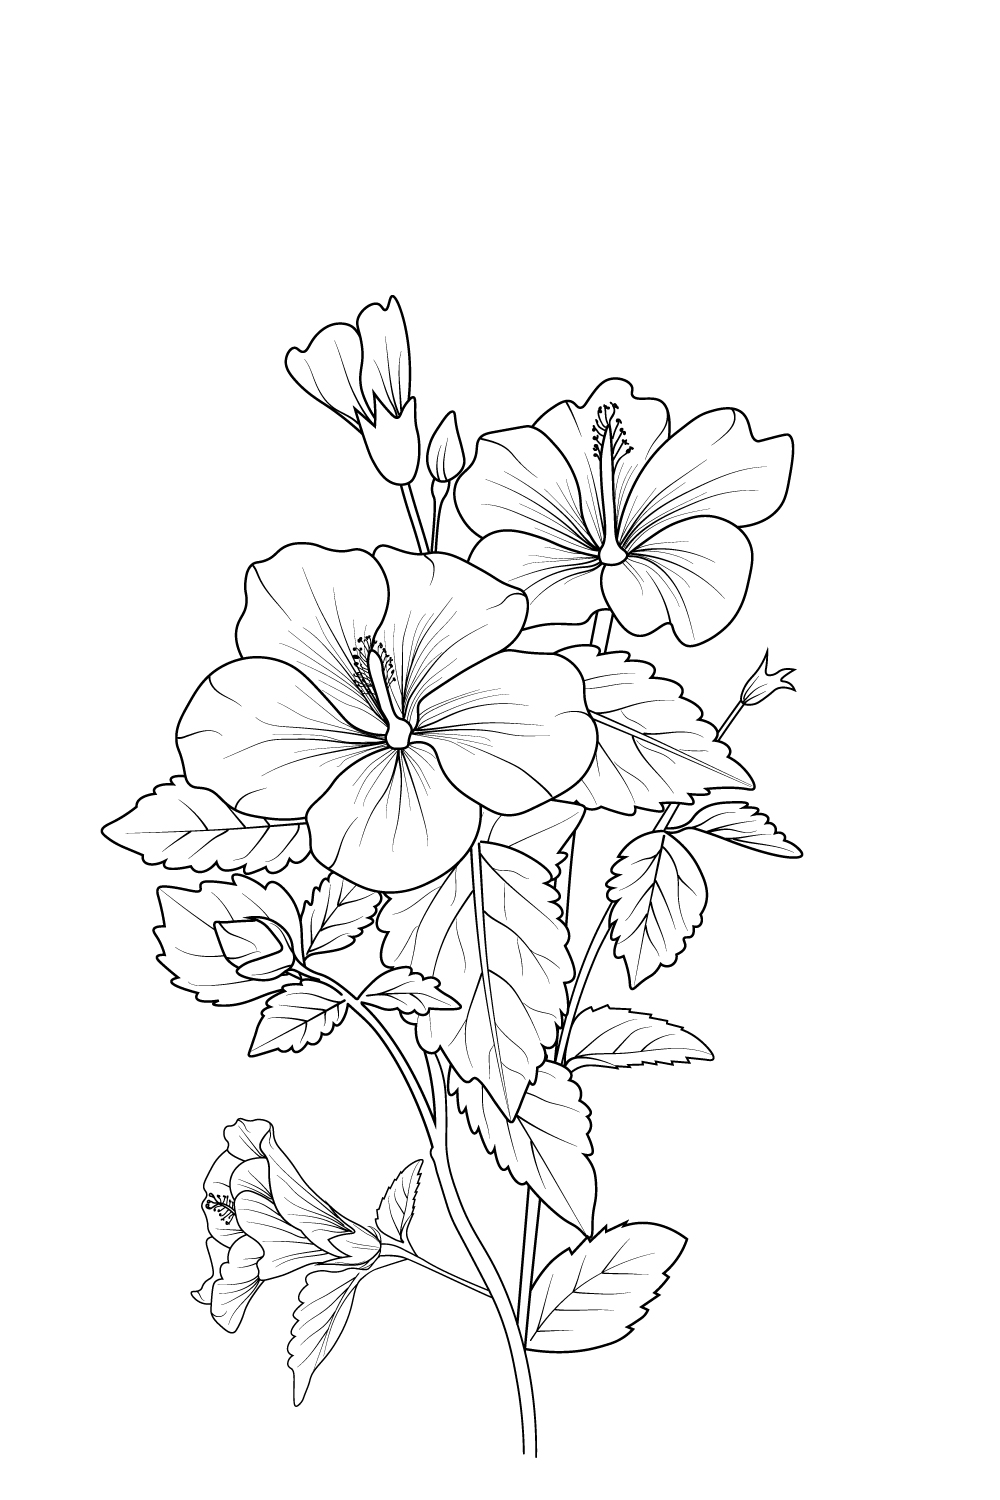 vector hibiscus flower hibiscus flower drawing easy, sketch easy hibiscus flower drawing pinterest preview image.